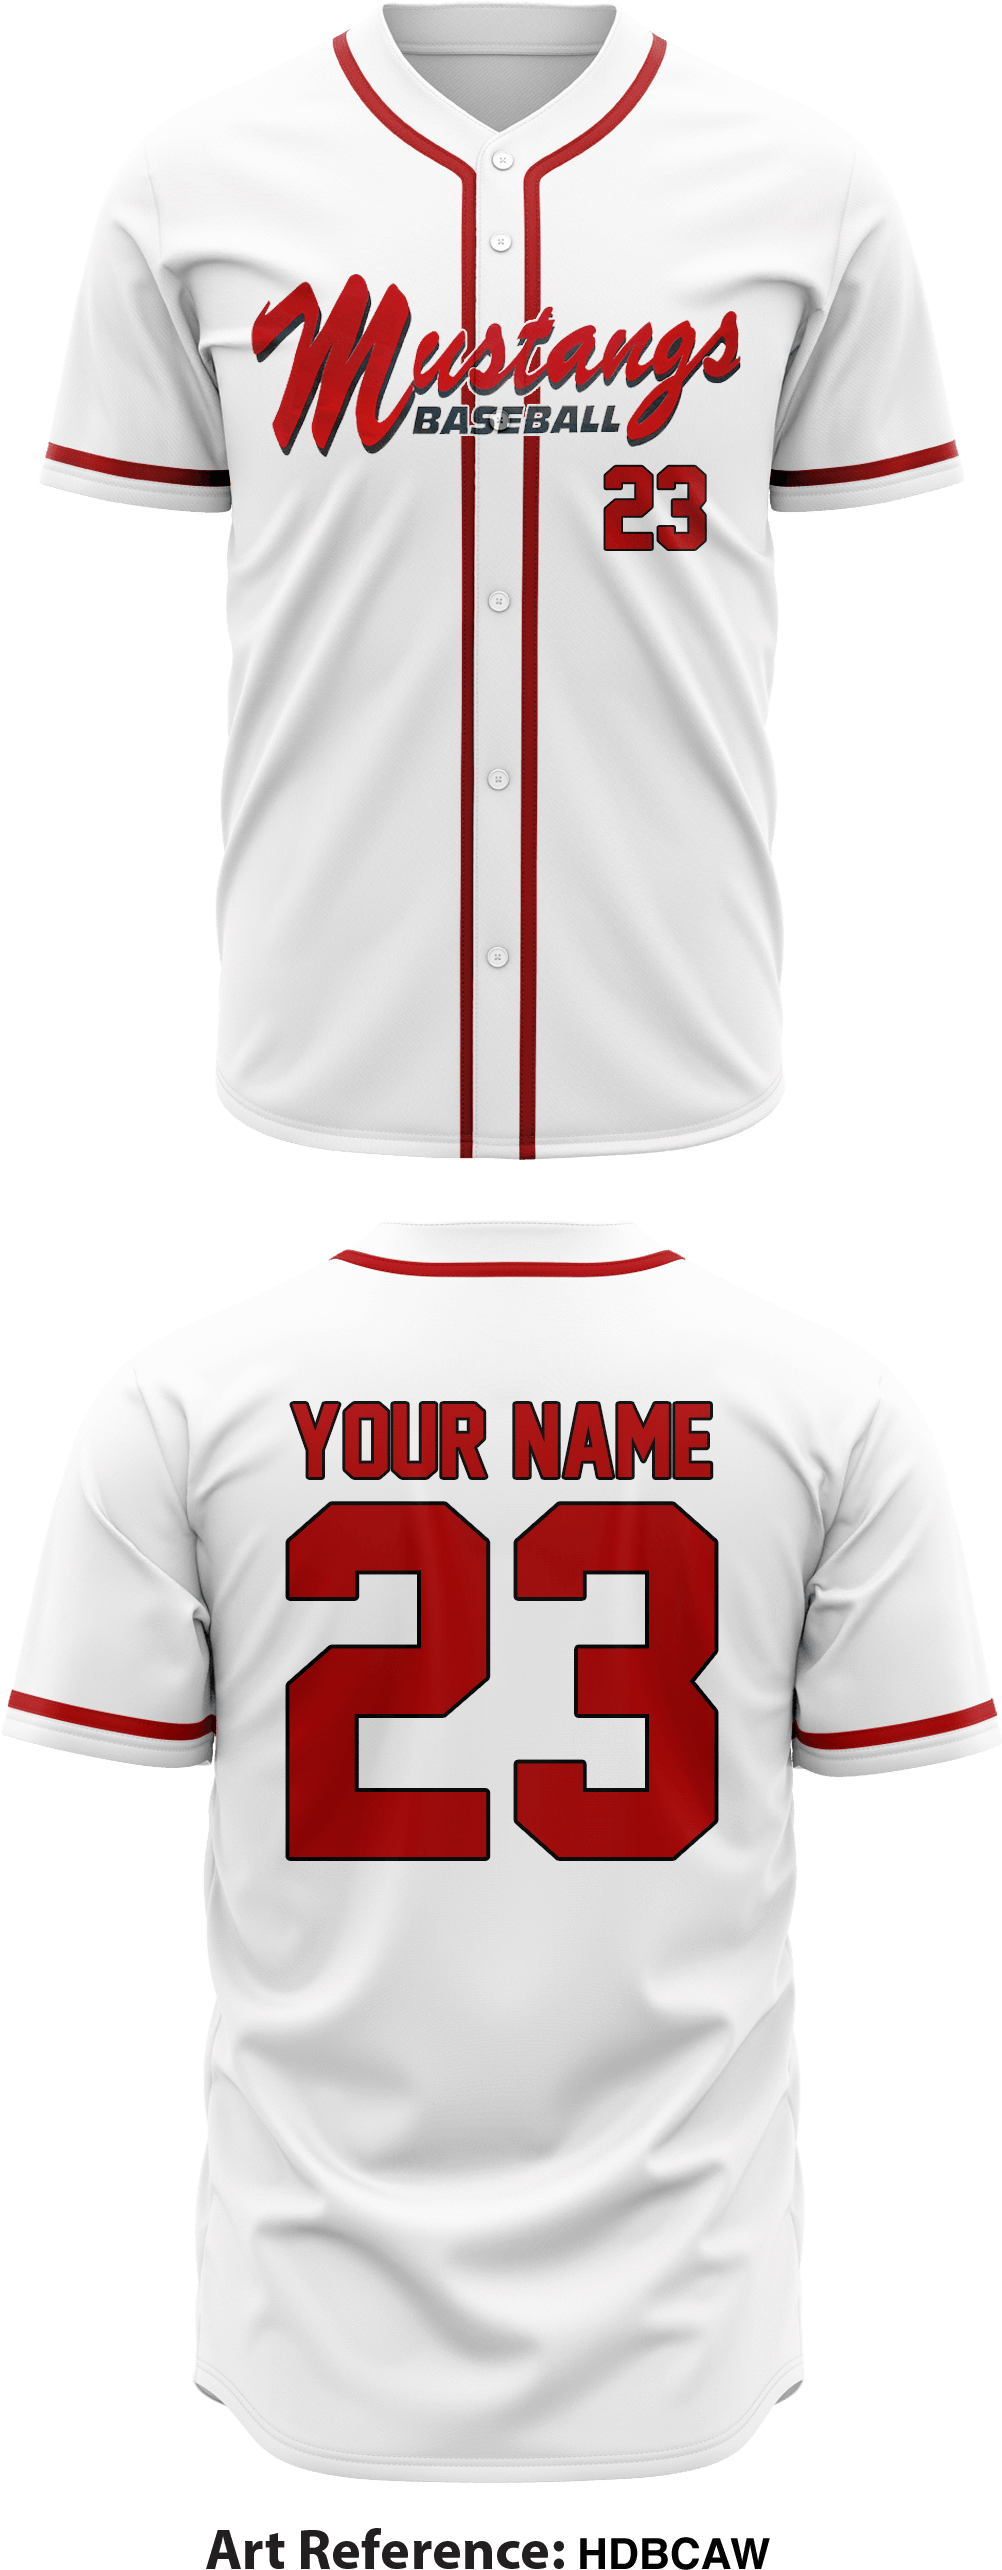 A White And Red Baseball Jersey